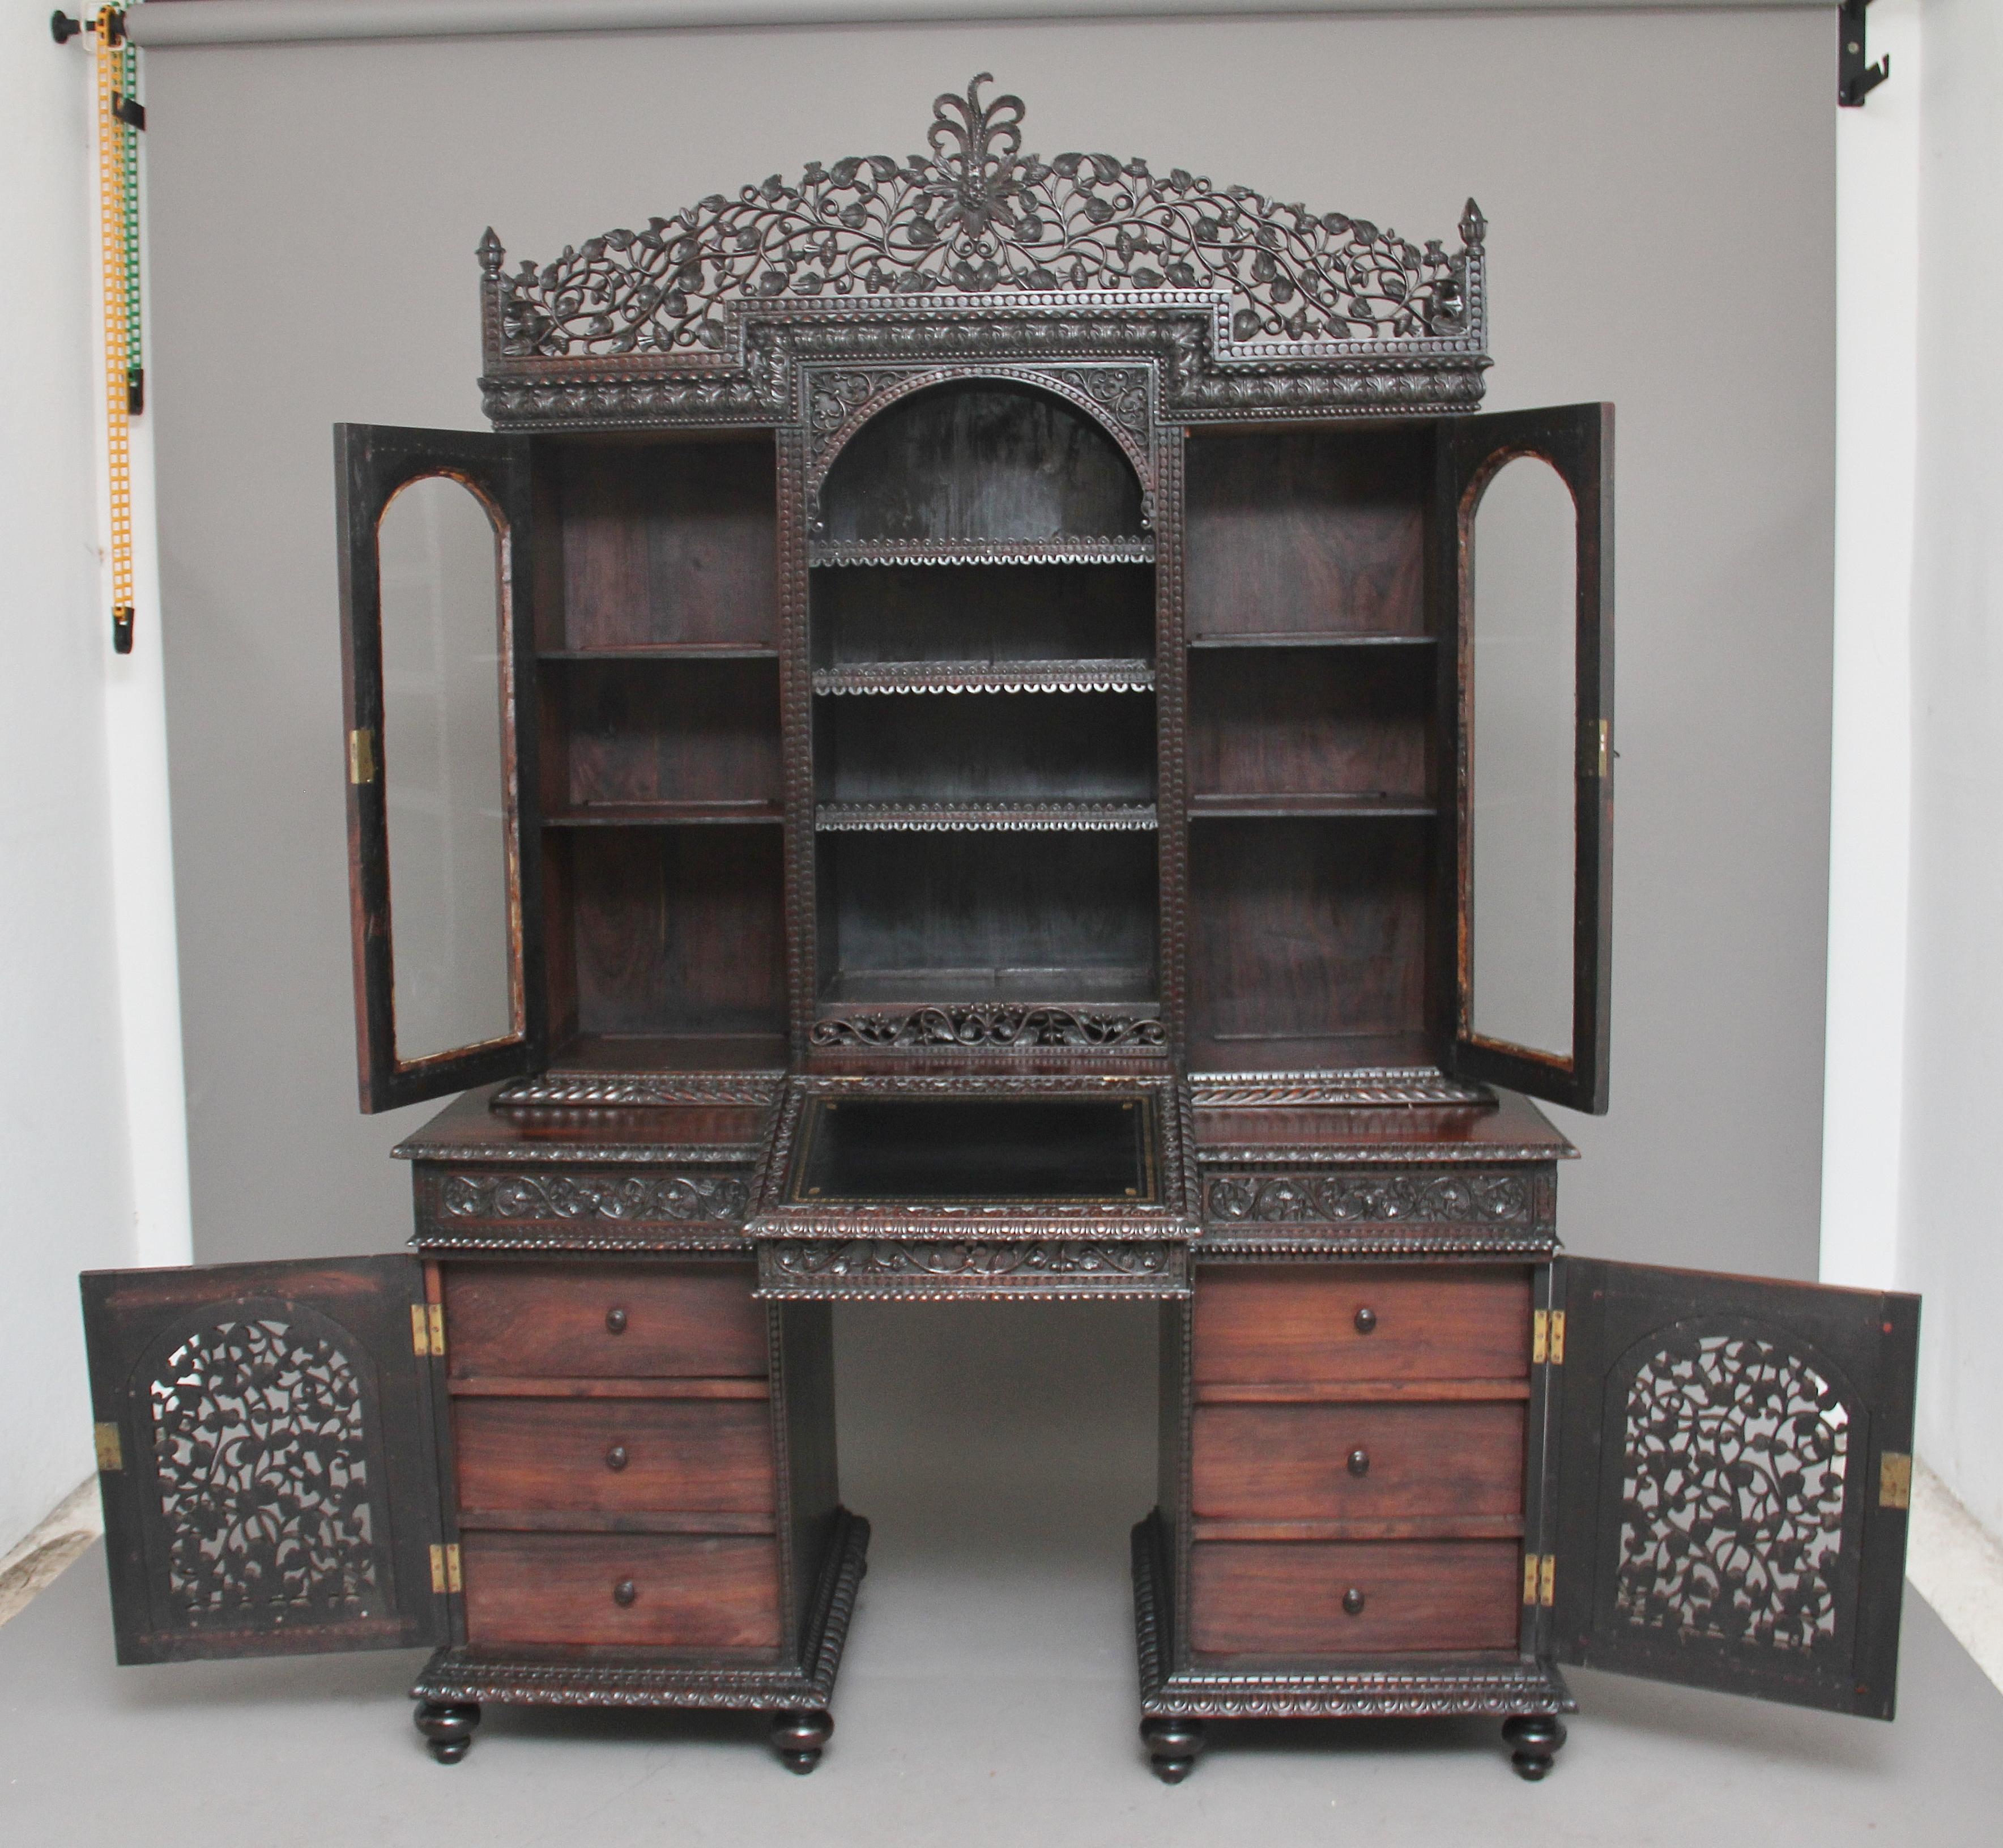 English 19th Century Anglo-Indian bookcase